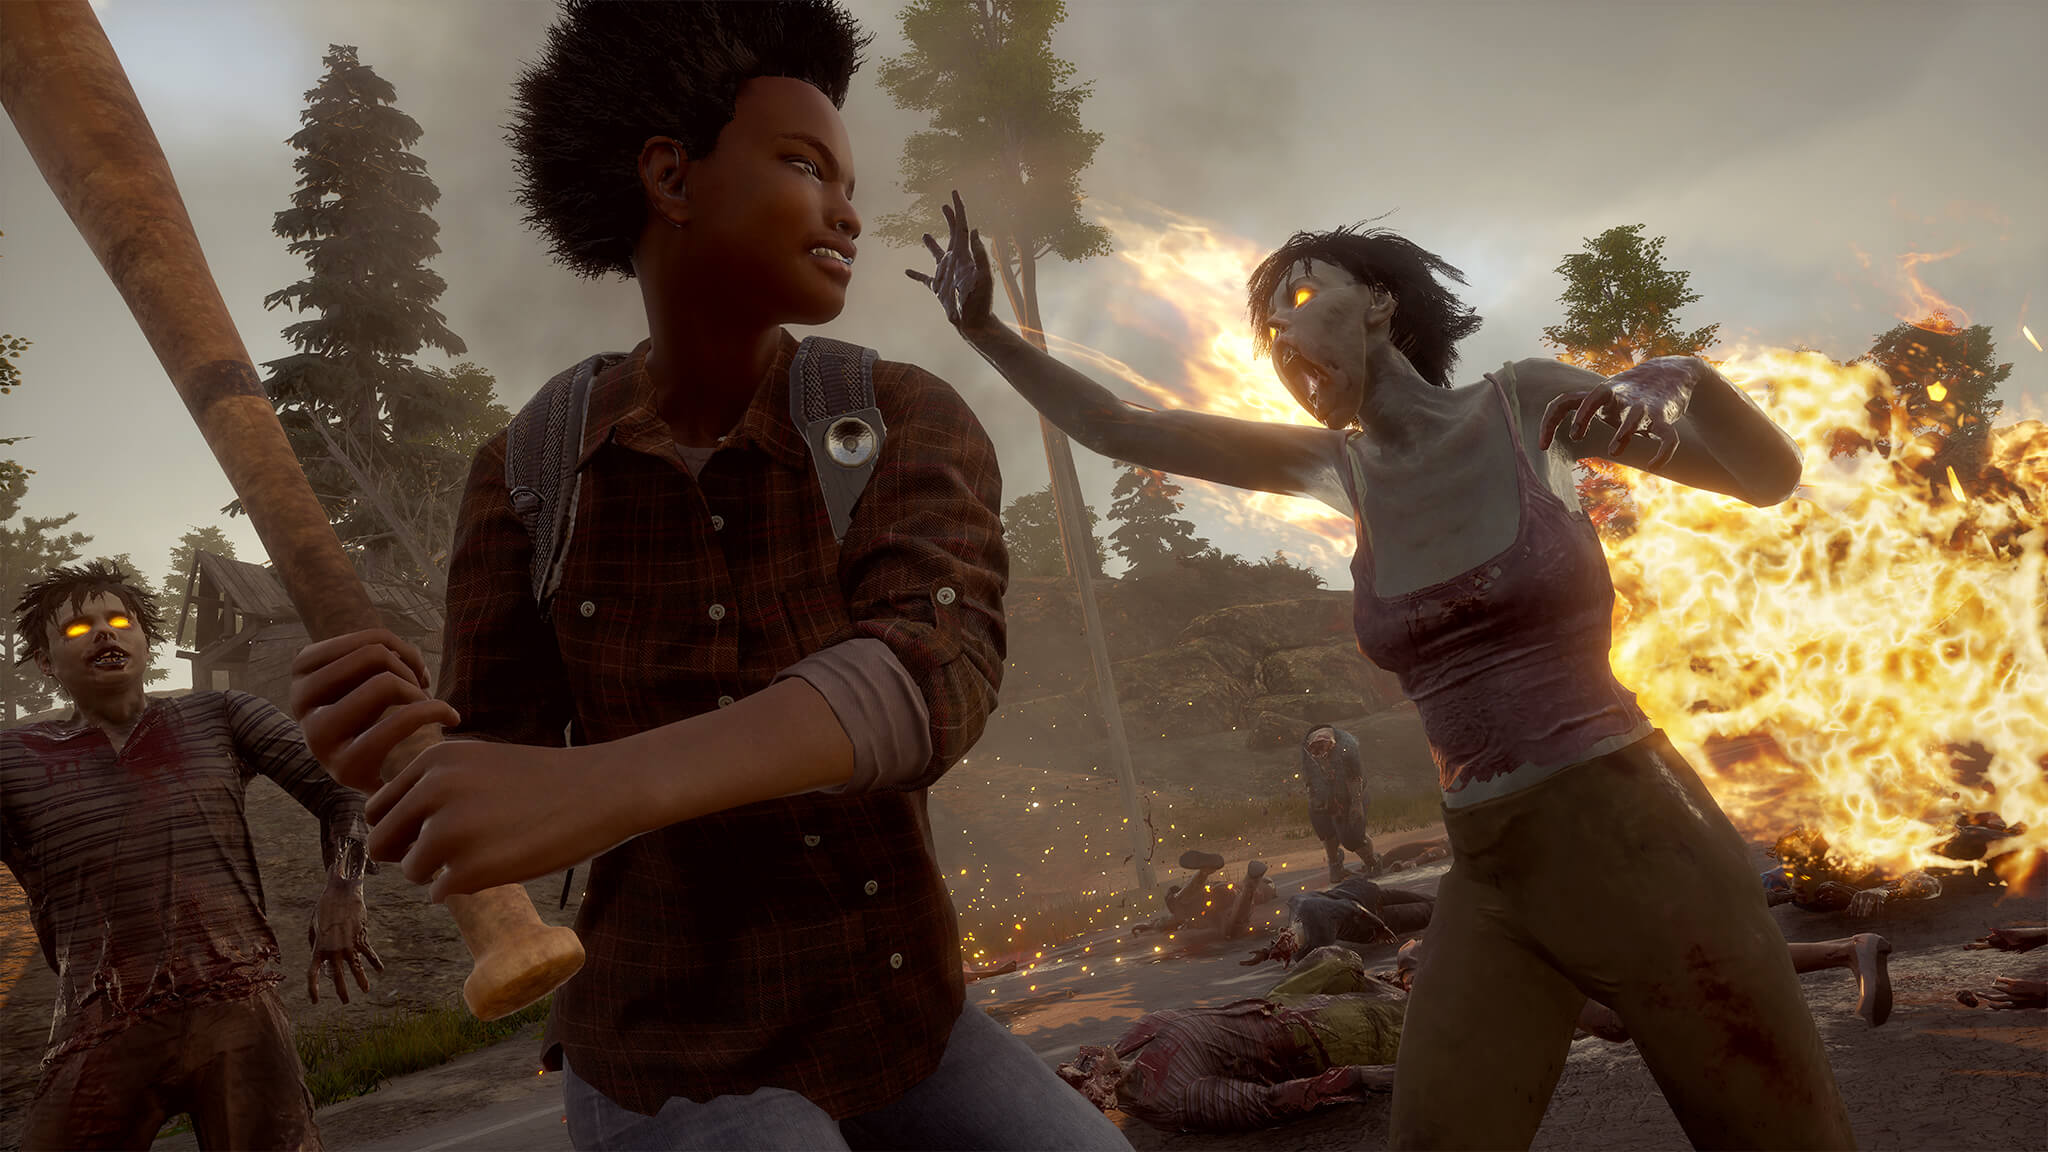 Microsoft will be making State of Decay 3, and it may even be the